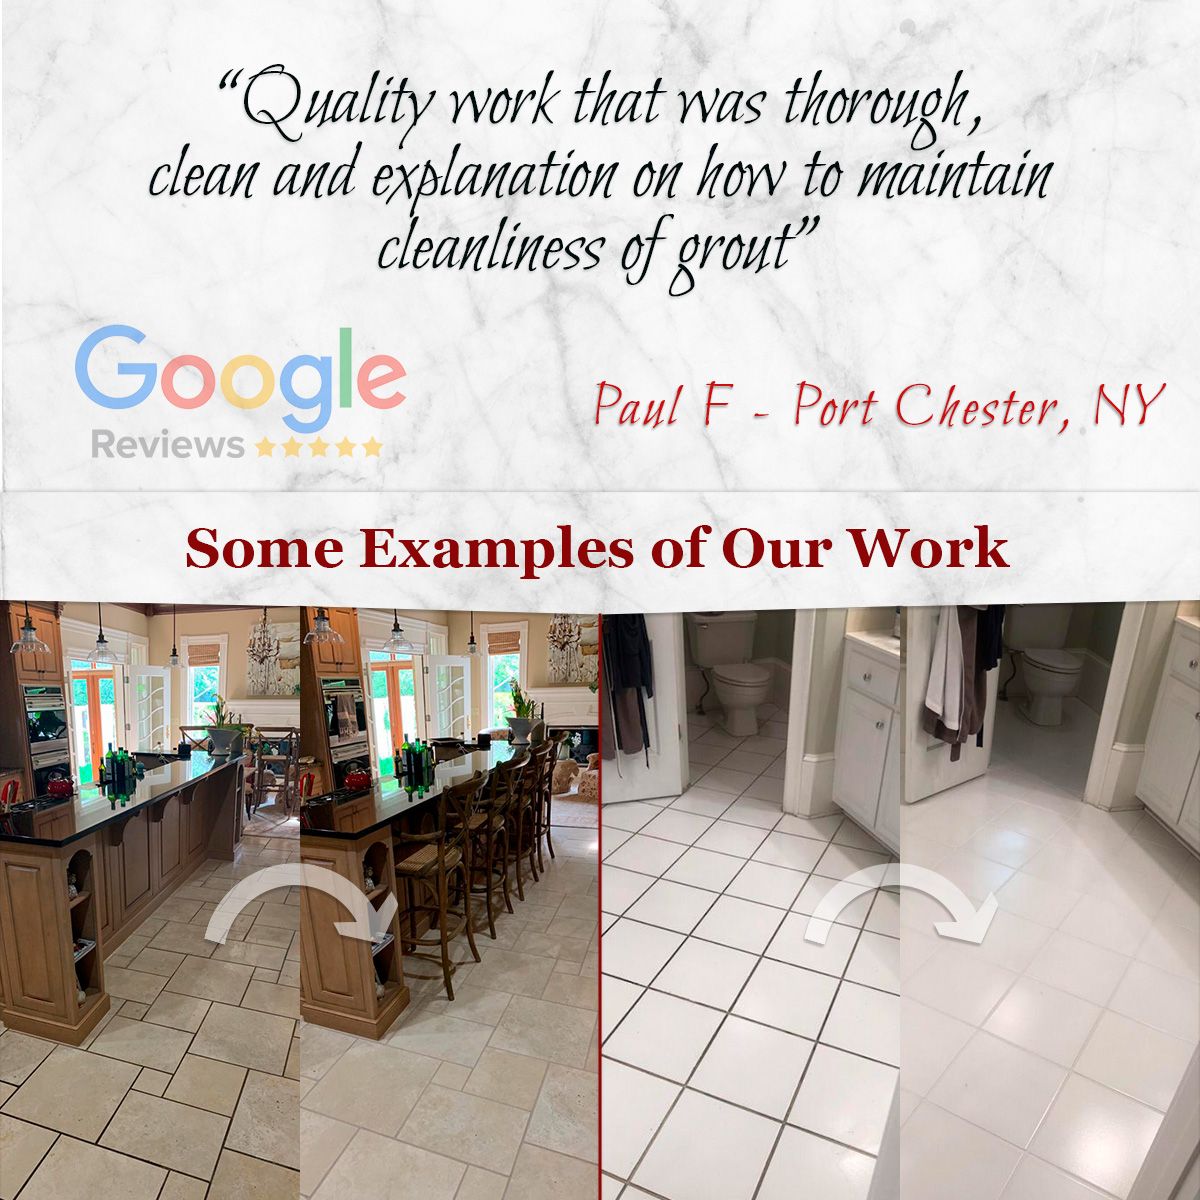 Quality work that was thorough, clean and explanation on how to maintain cleanliness of grout